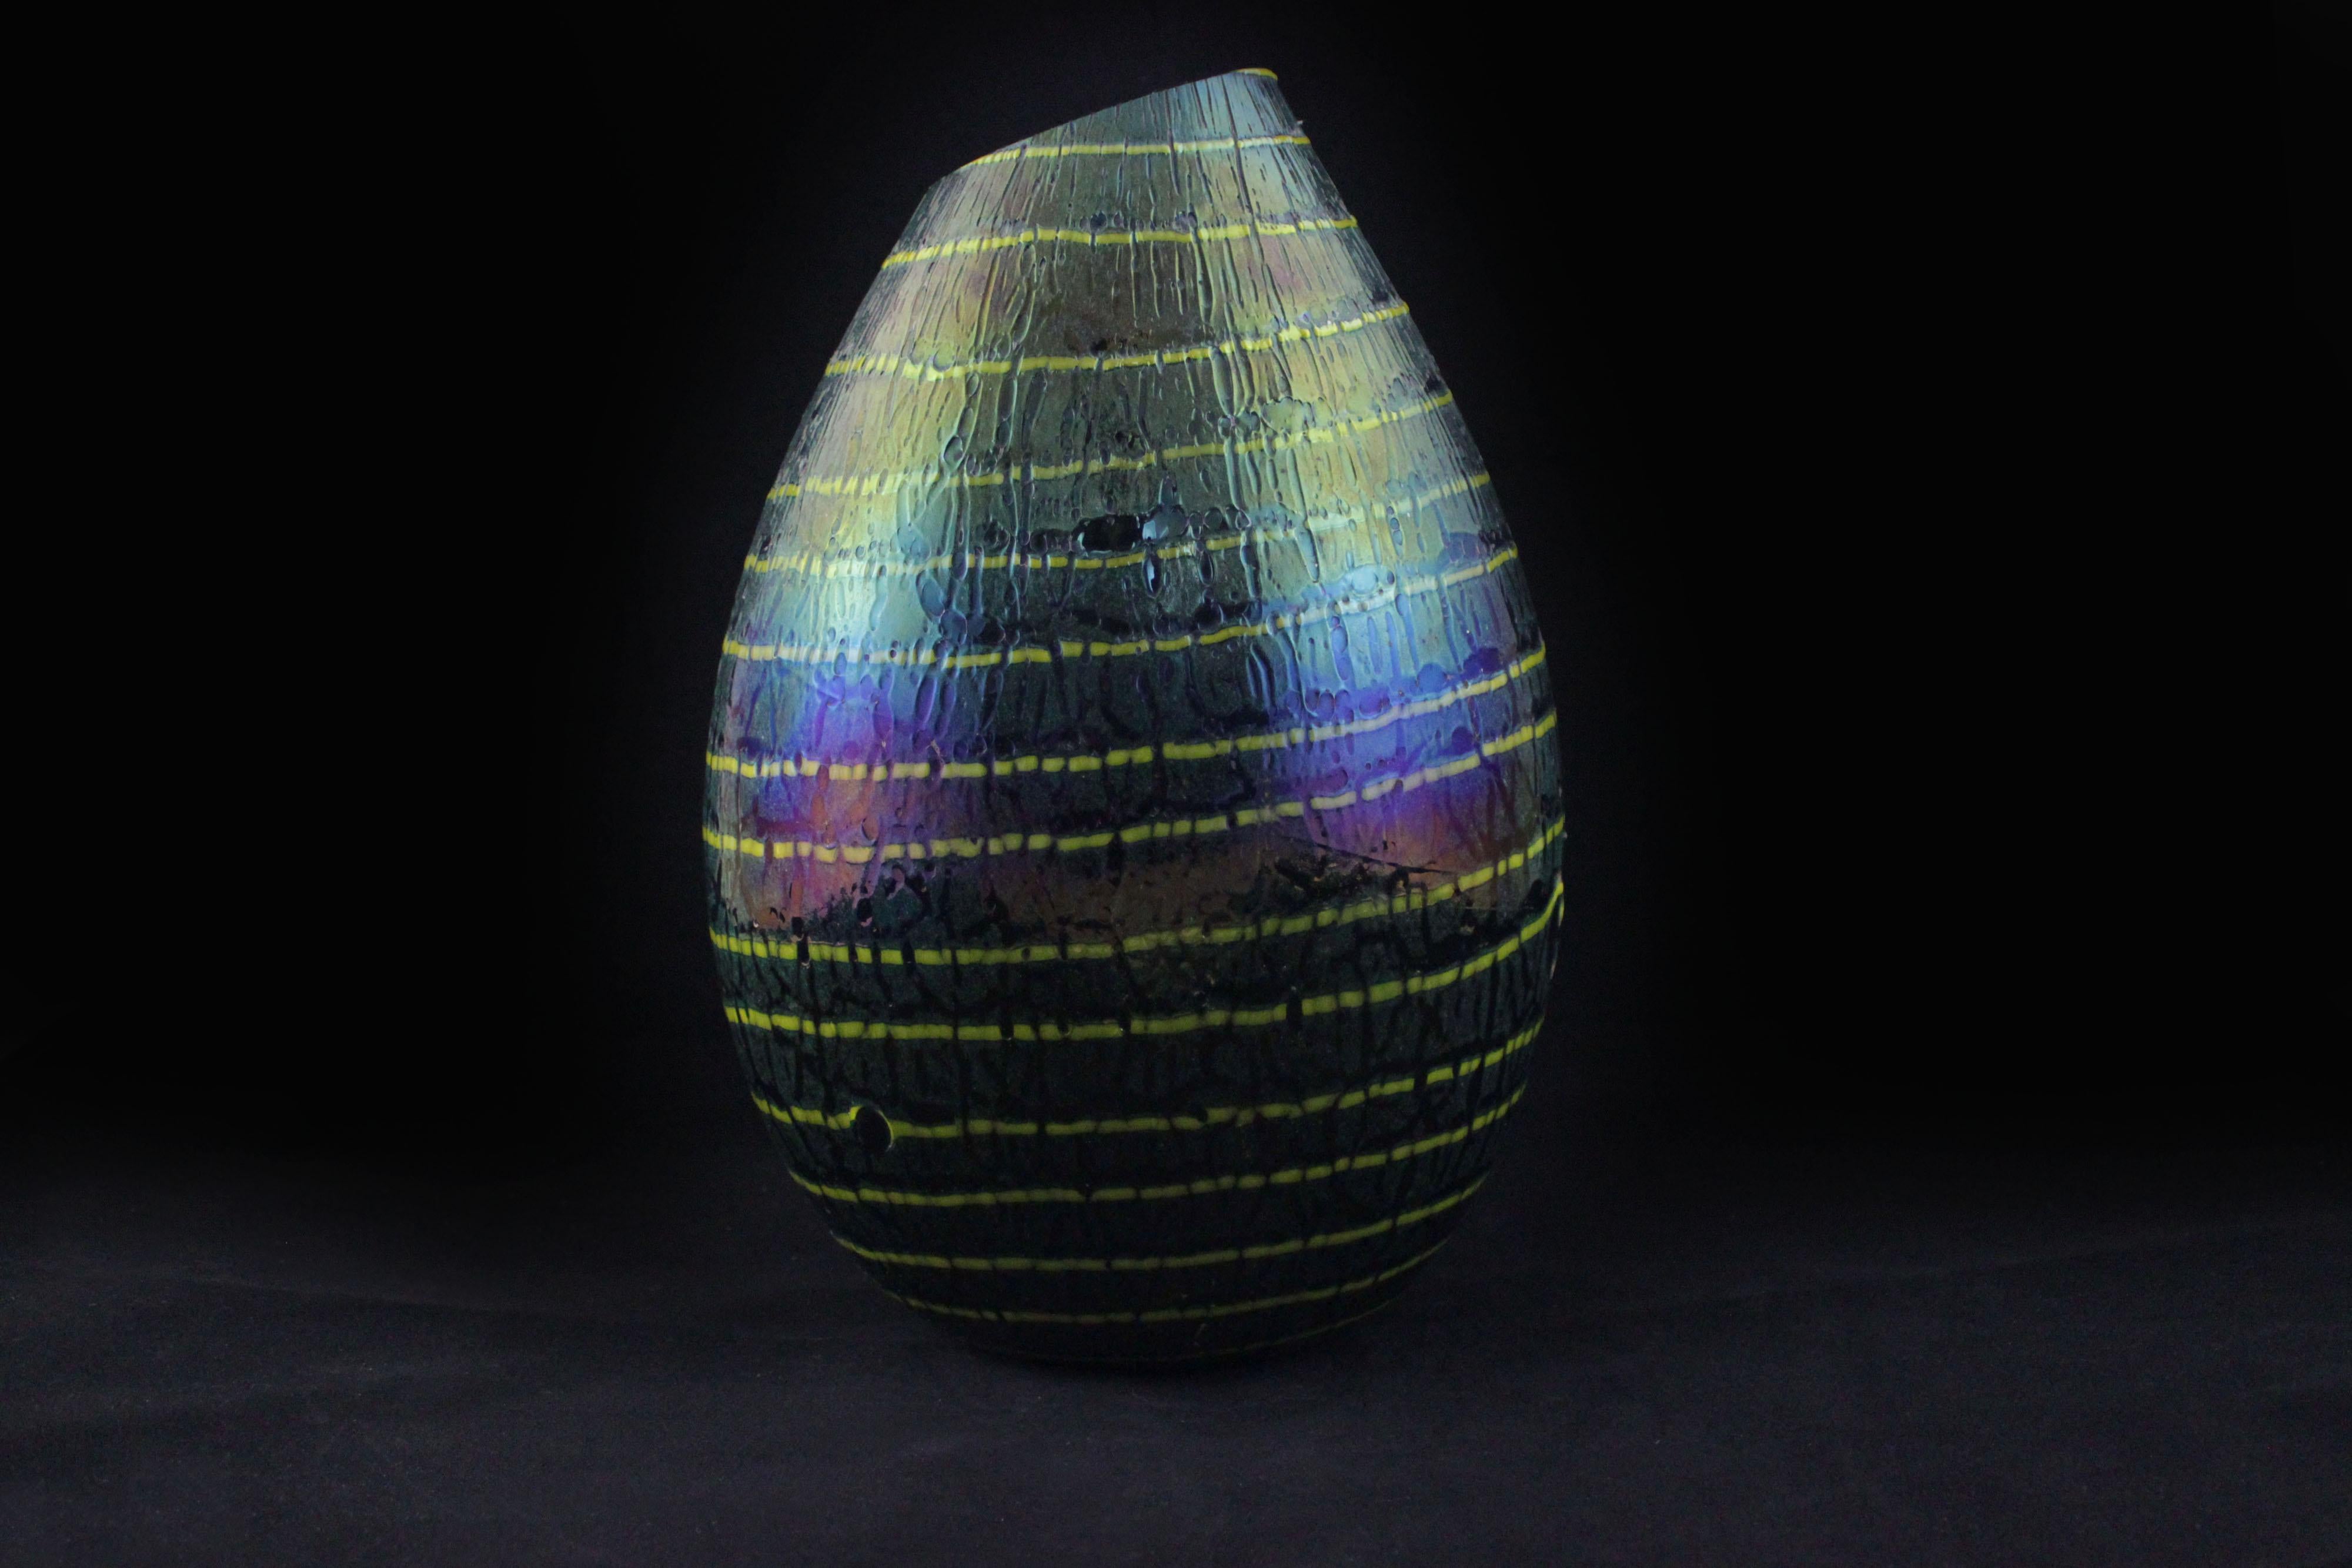 Oval-shaped globular vase with diagonally cut neck in opalizing and shiny polychrome submerged blown glass, with yellow spinning decoration descending spirally. under the scratched base Radi 1948.
Packaging with bubble wrap and cardboard boxes is